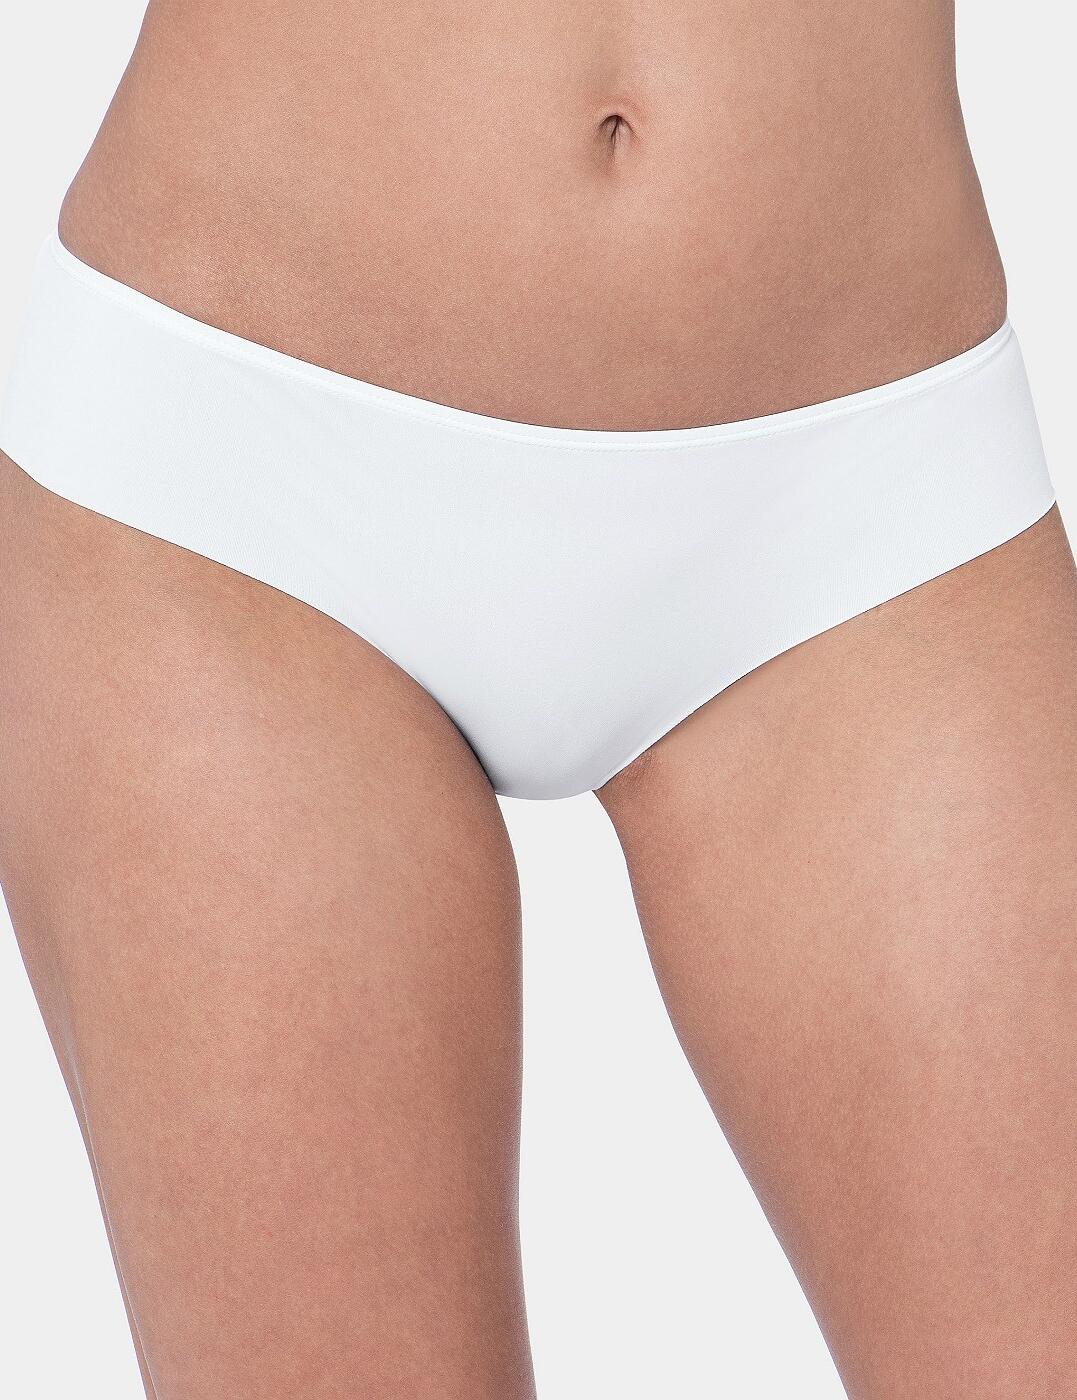 SPORTY MICRO - Hipster knickers